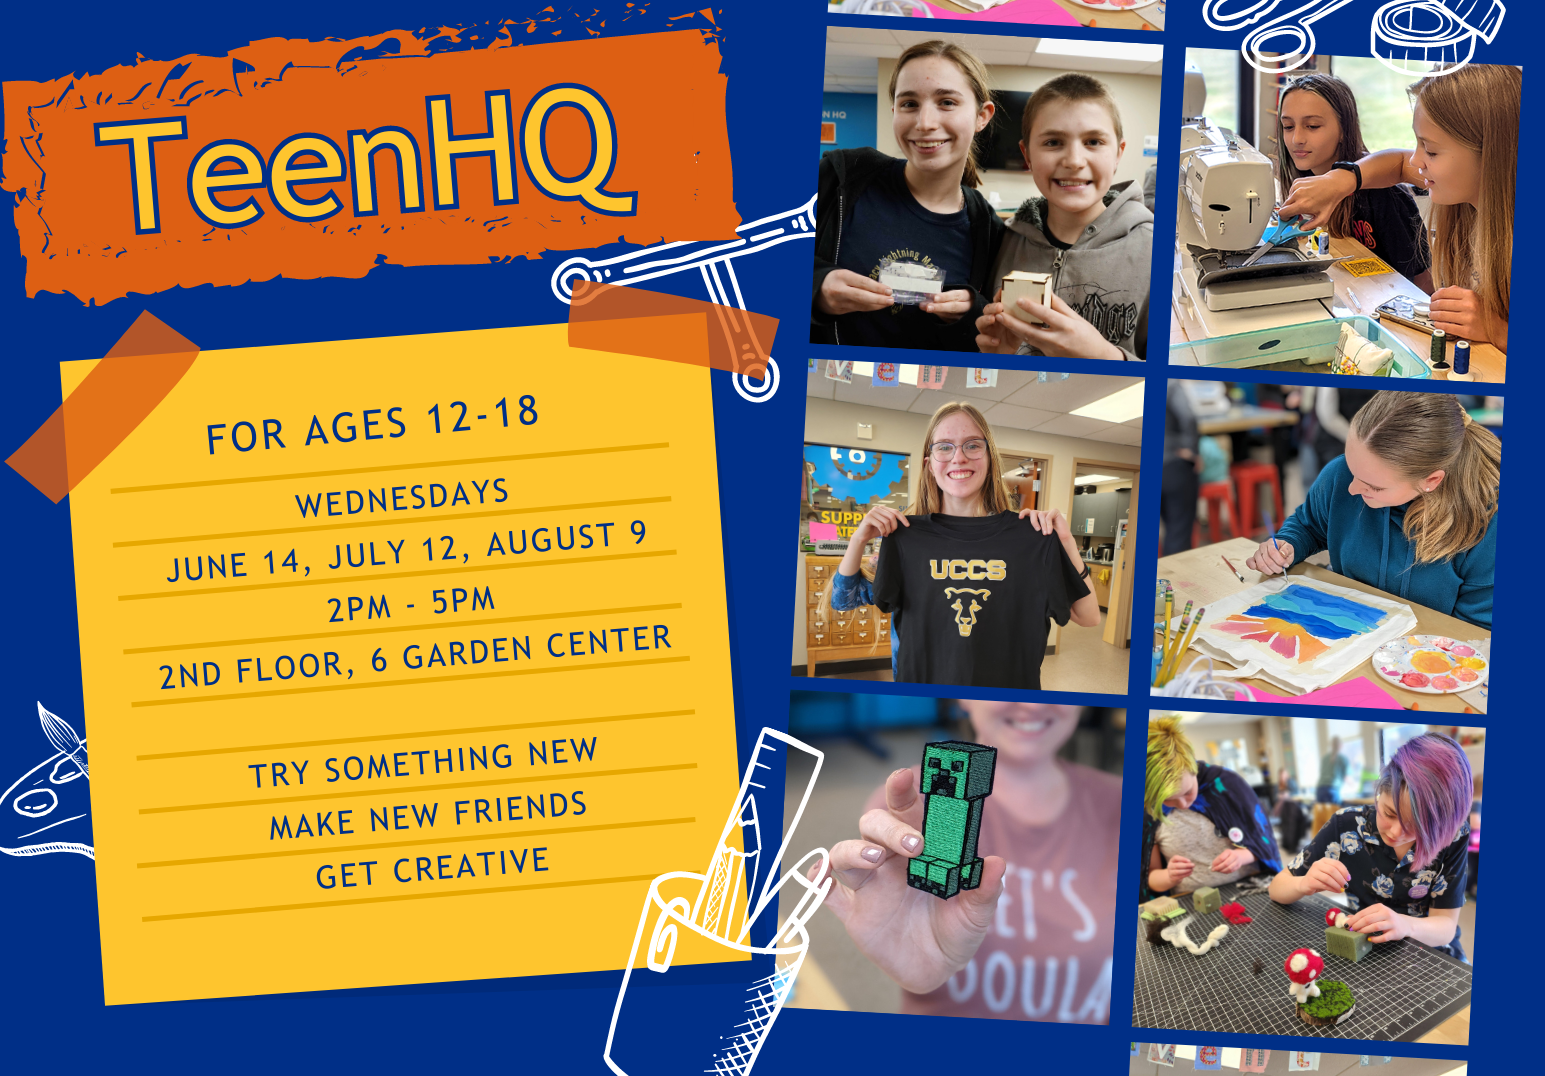 TeenHQ flyer with photos of teens creating projects with friends